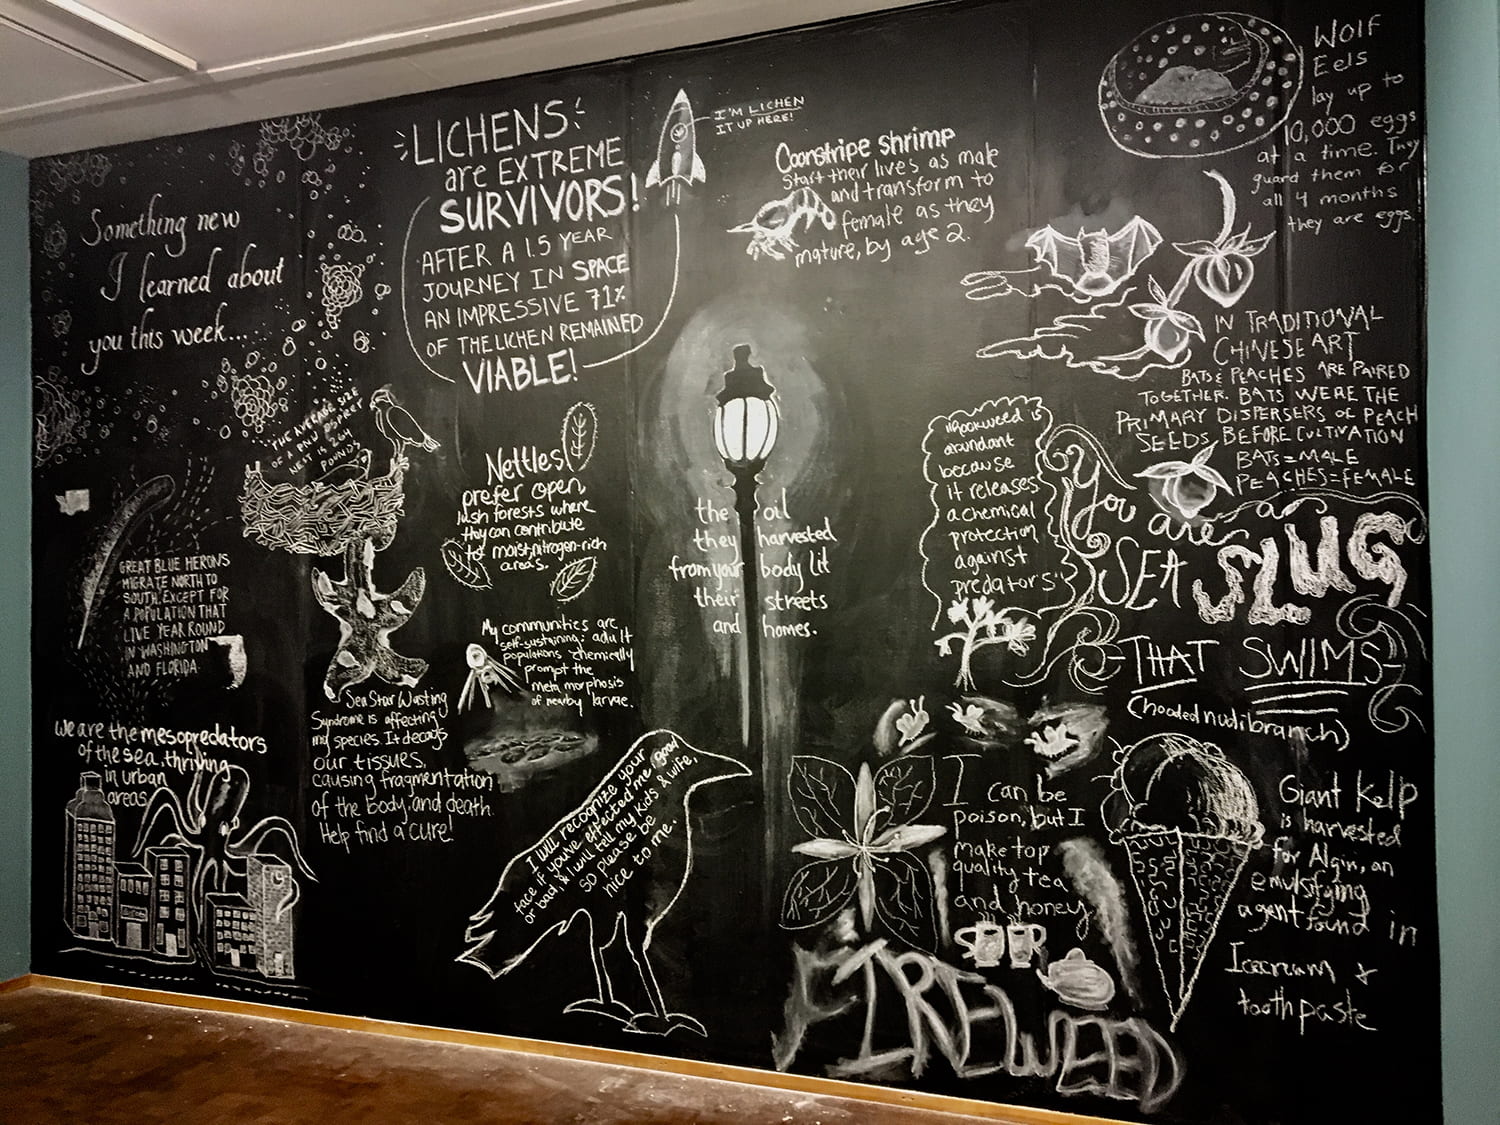 full view of a chalkboard with various labeled drawings on it